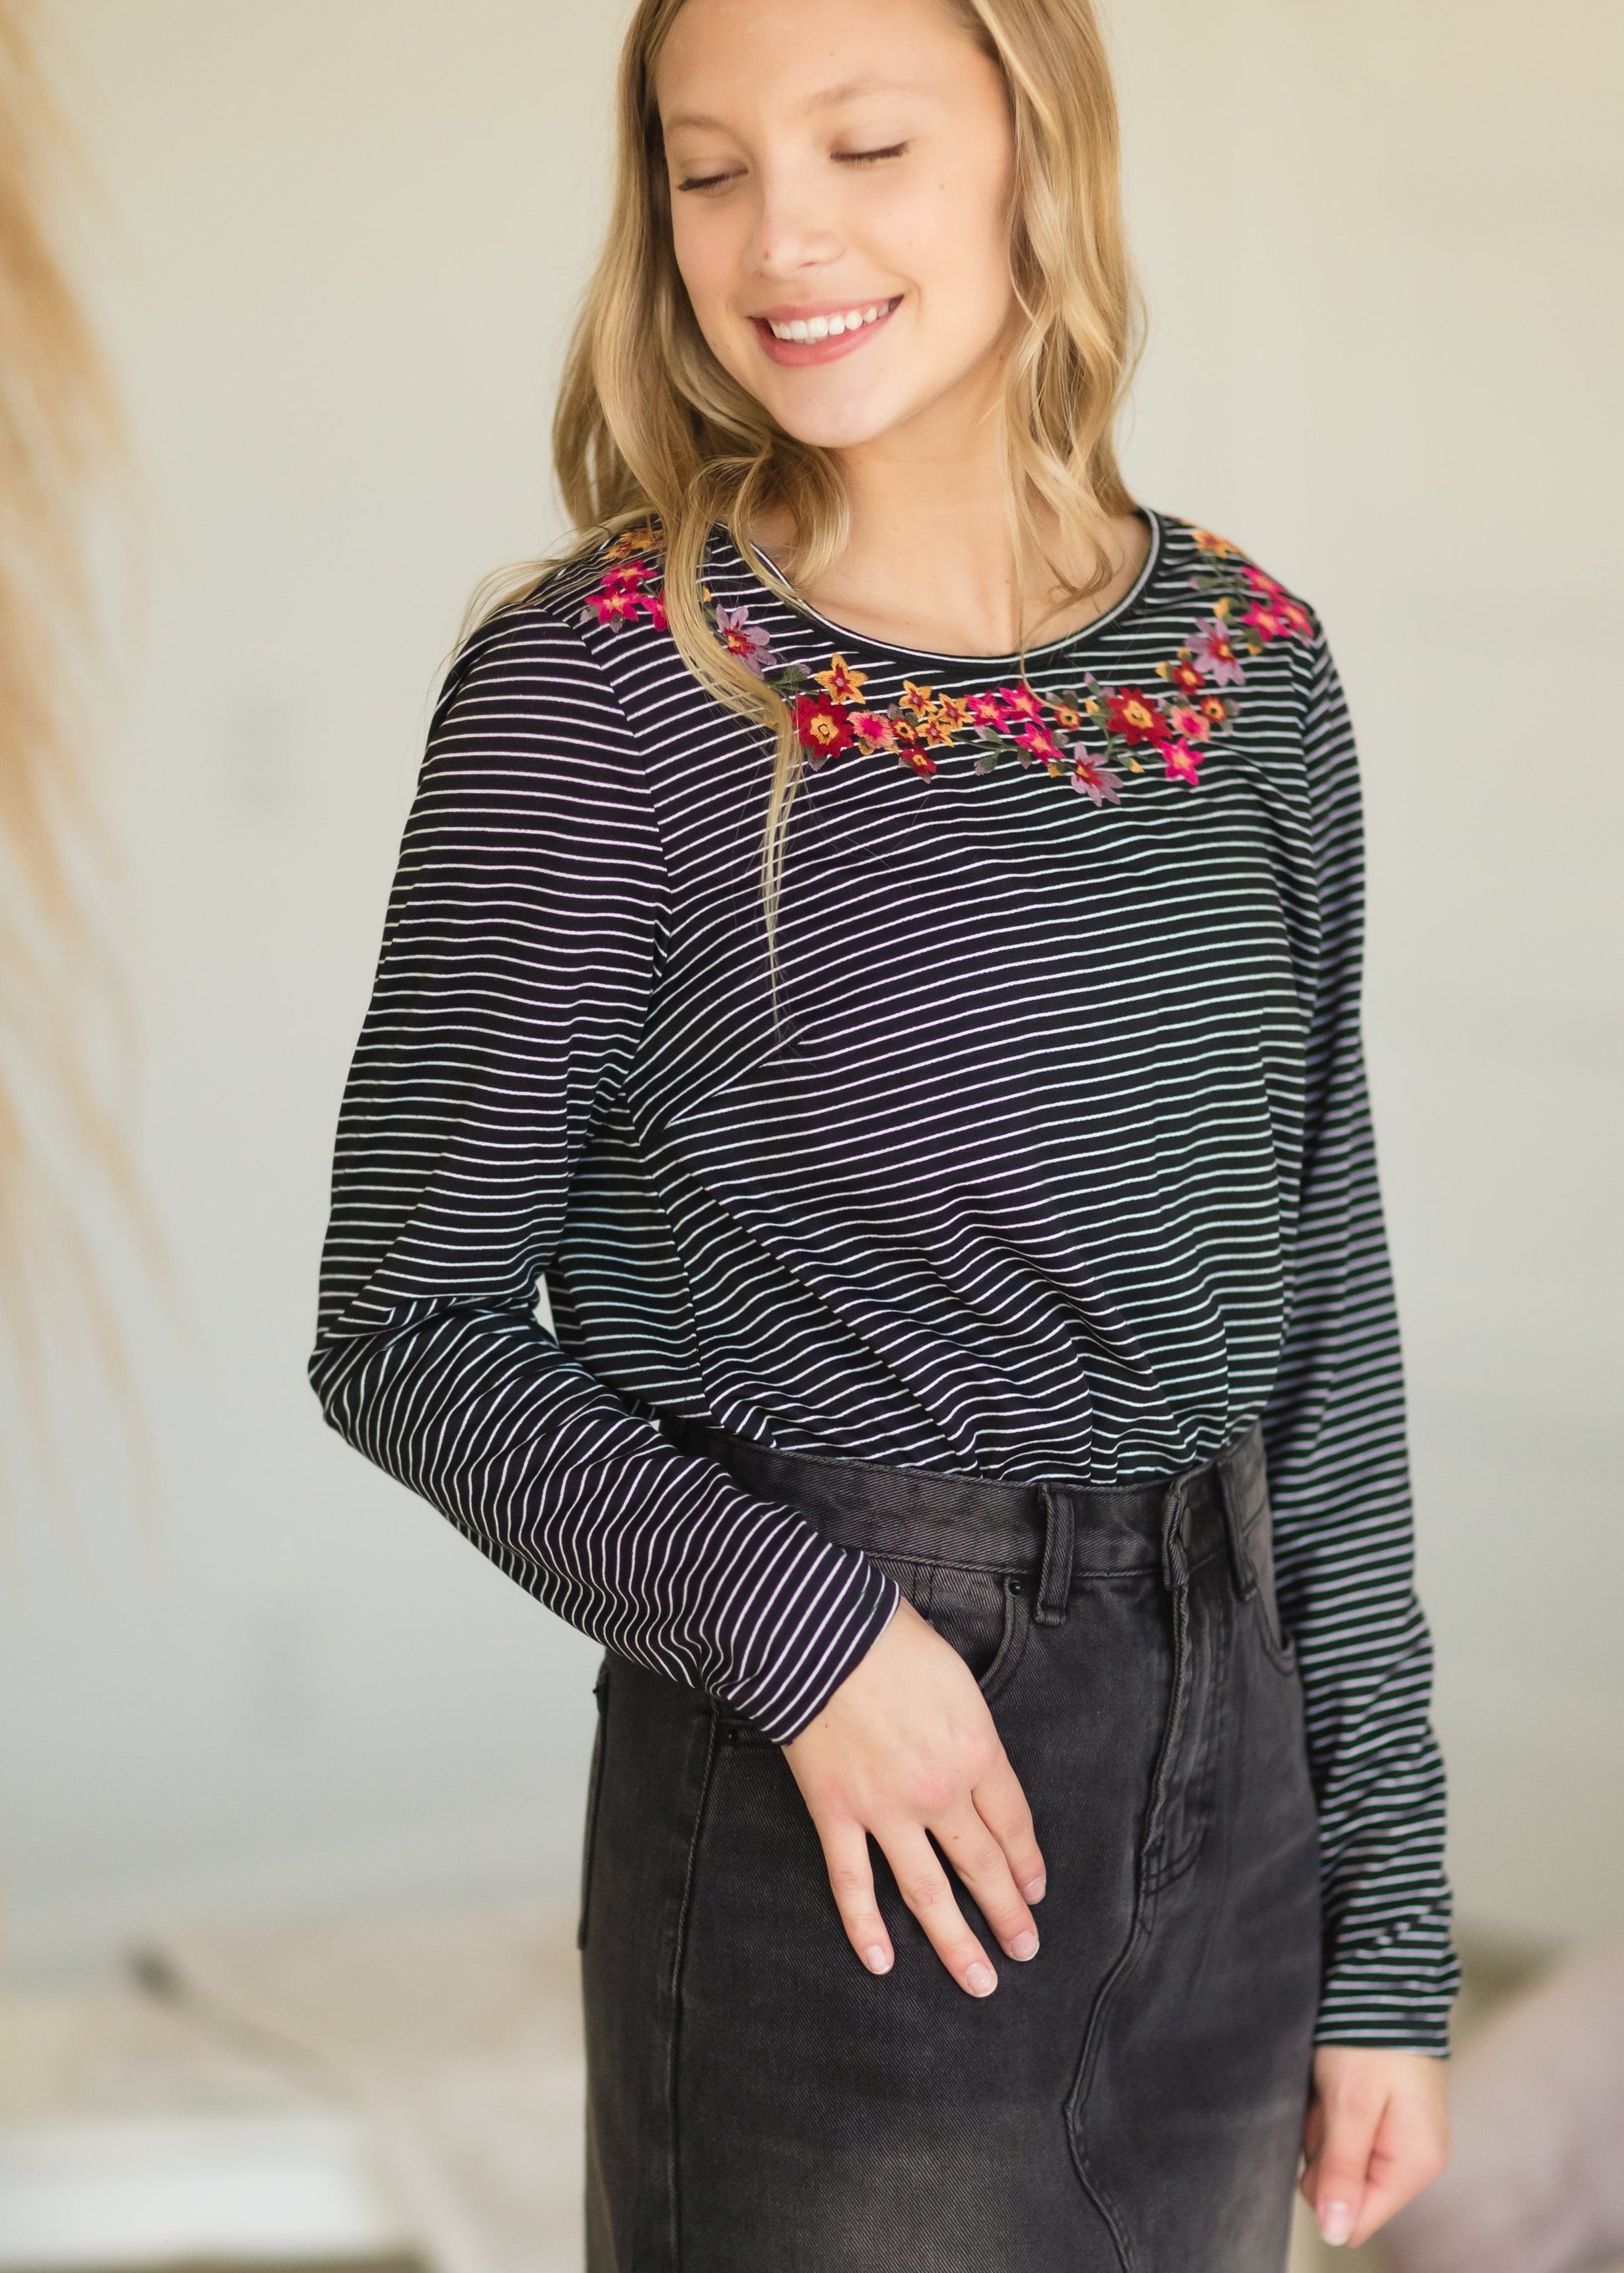 Black Striped Knit Embroidered Top - FINAL SALE Tops